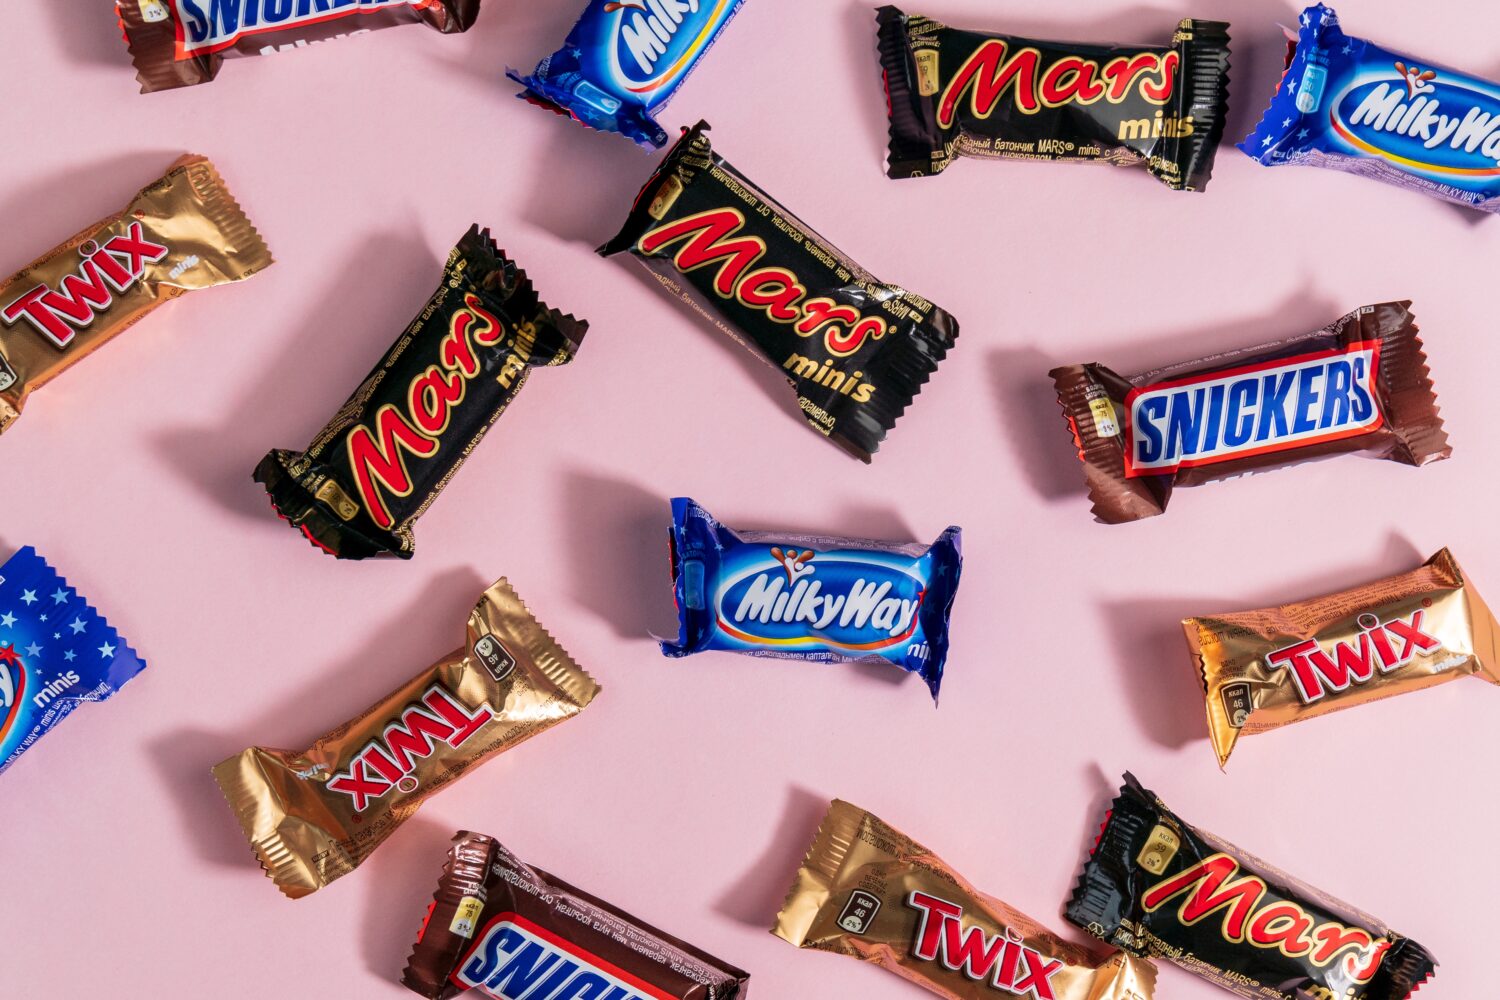 Mars Wrigley’s CFO on championing the switch to paper-based packaging